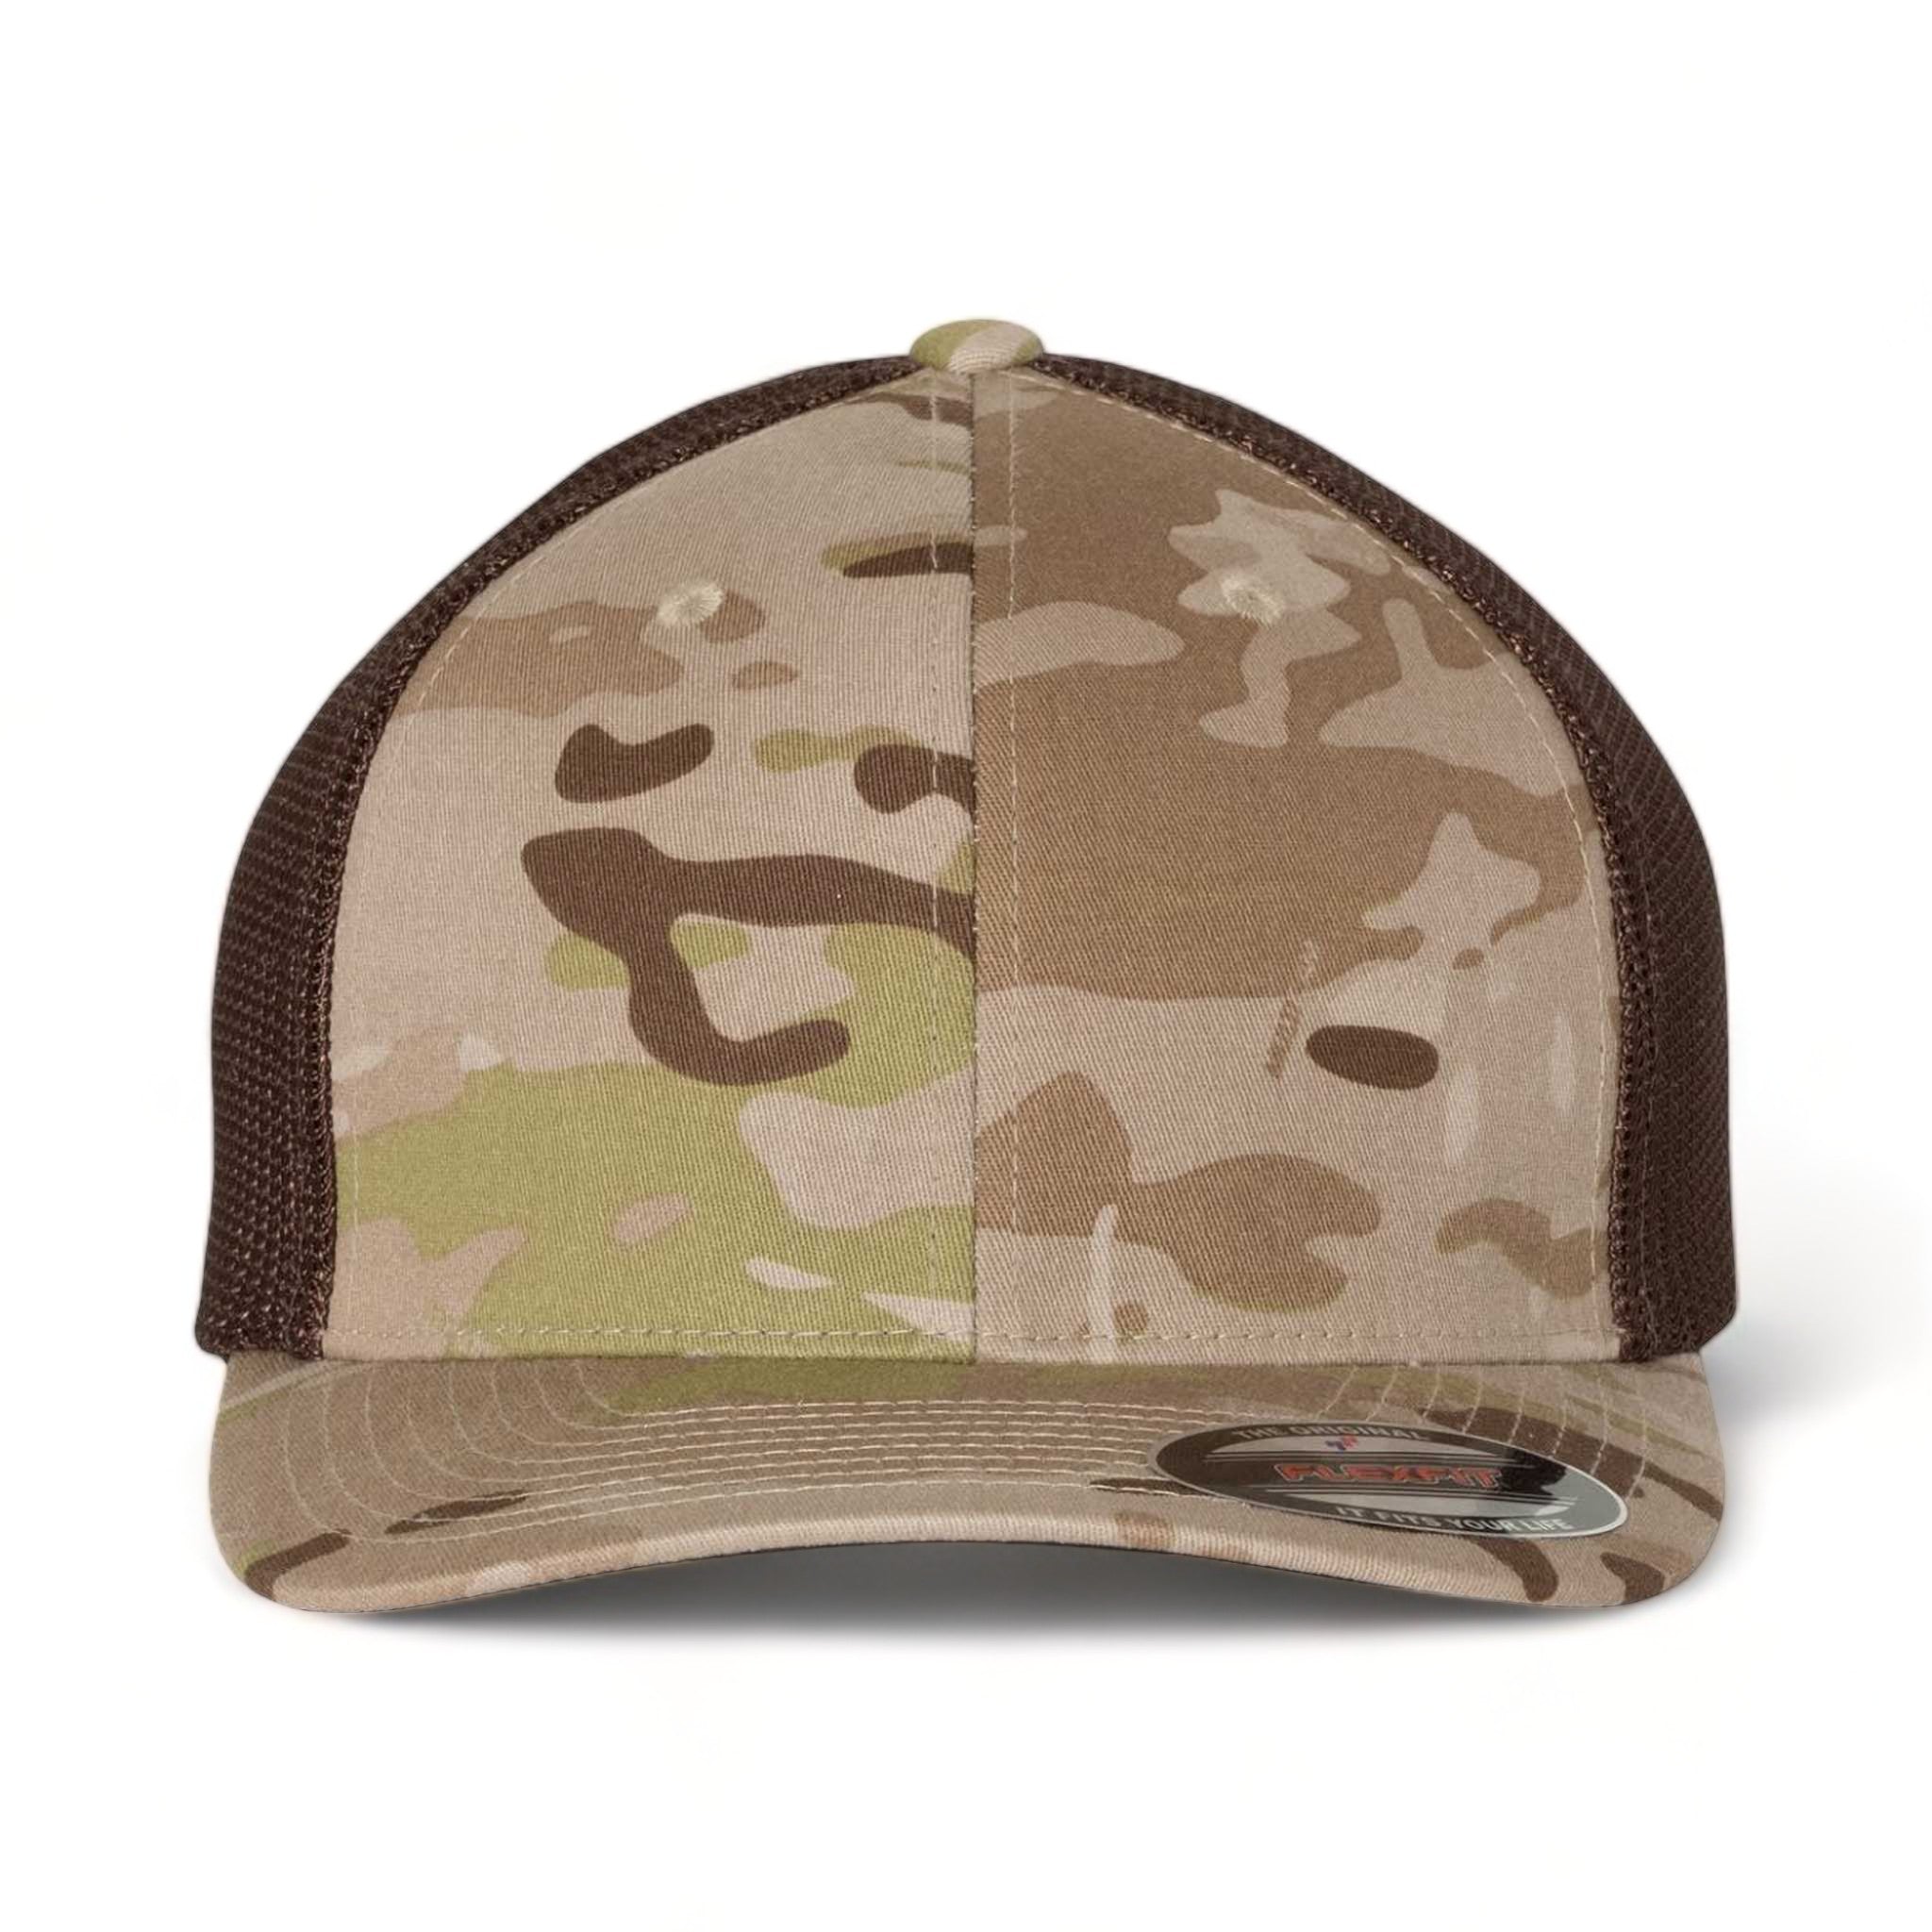 Front view of Flexfit 6511 custom hat in multicam arid and brown